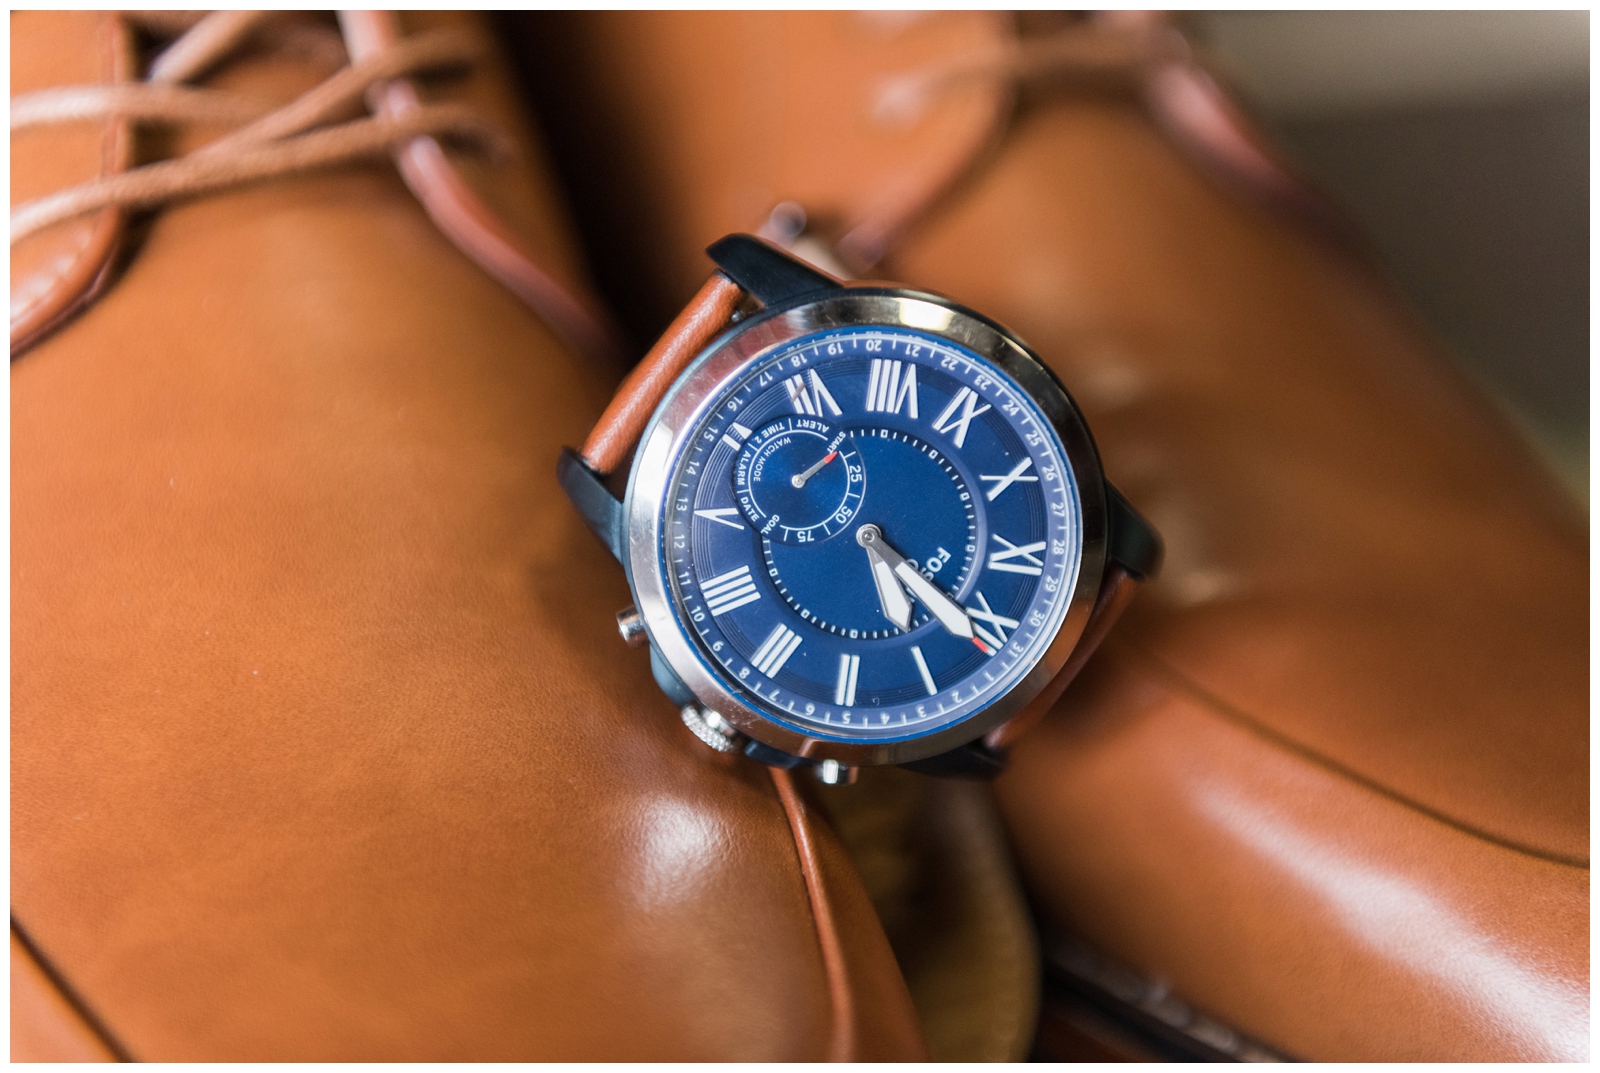 groom's watch with blue face rests on brown shoes